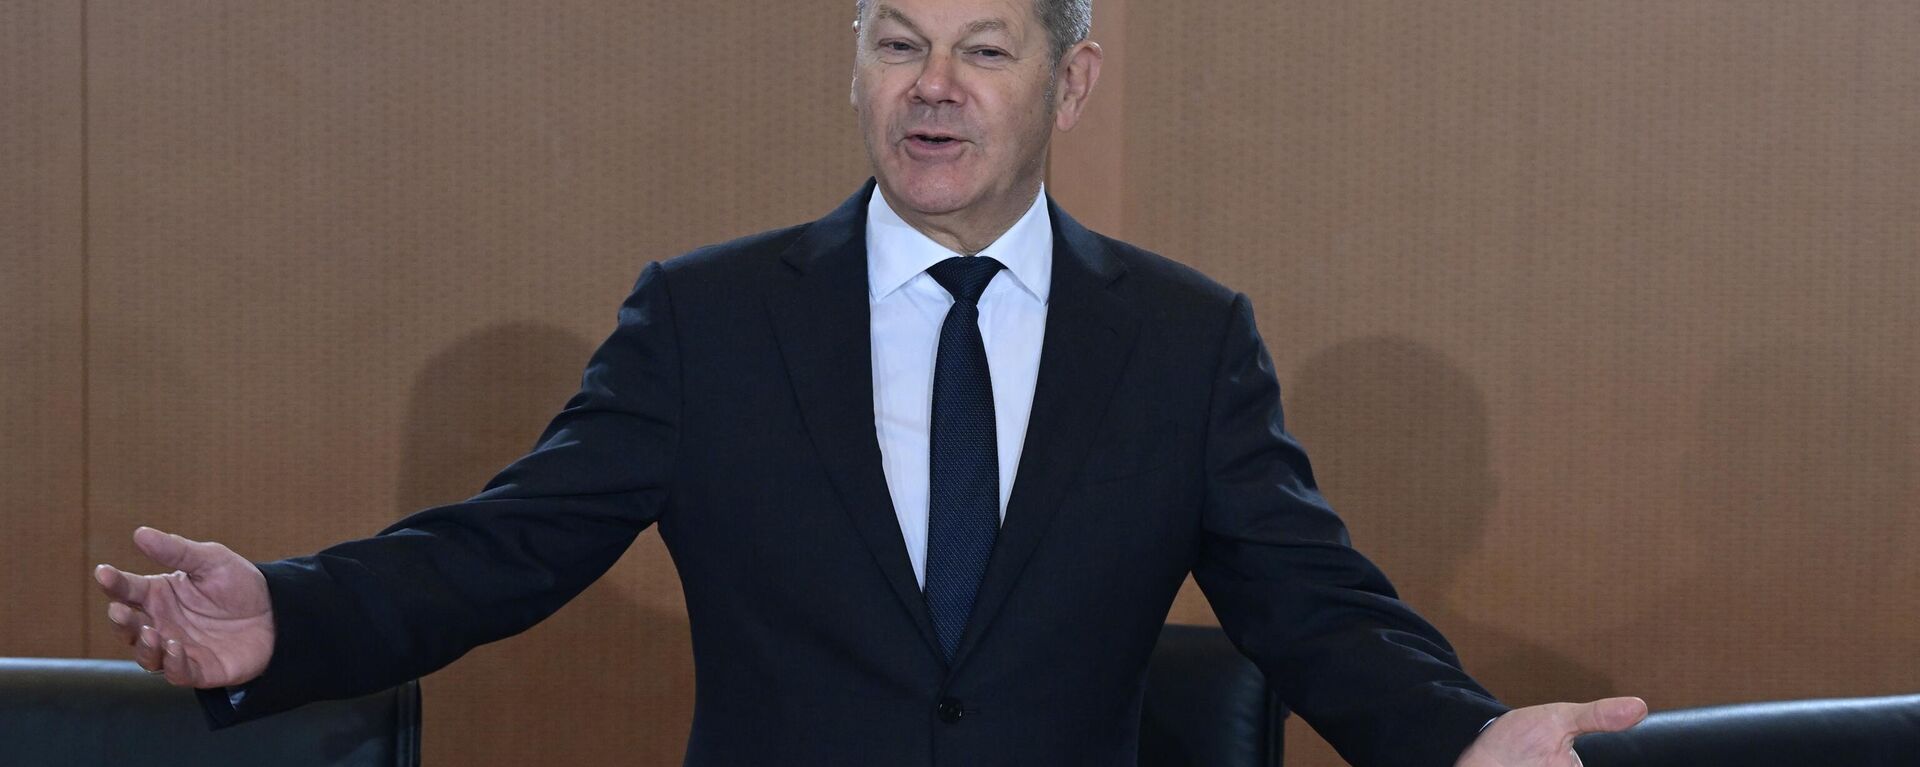 German Chancellor Olaf Scholz thanks cabinet members, after a year of the governmental coalition, on December 7, 2022, during a meeting of the German cabinet at the chancellery in Berlin - Sputnik International, 1920, 08.12.2022